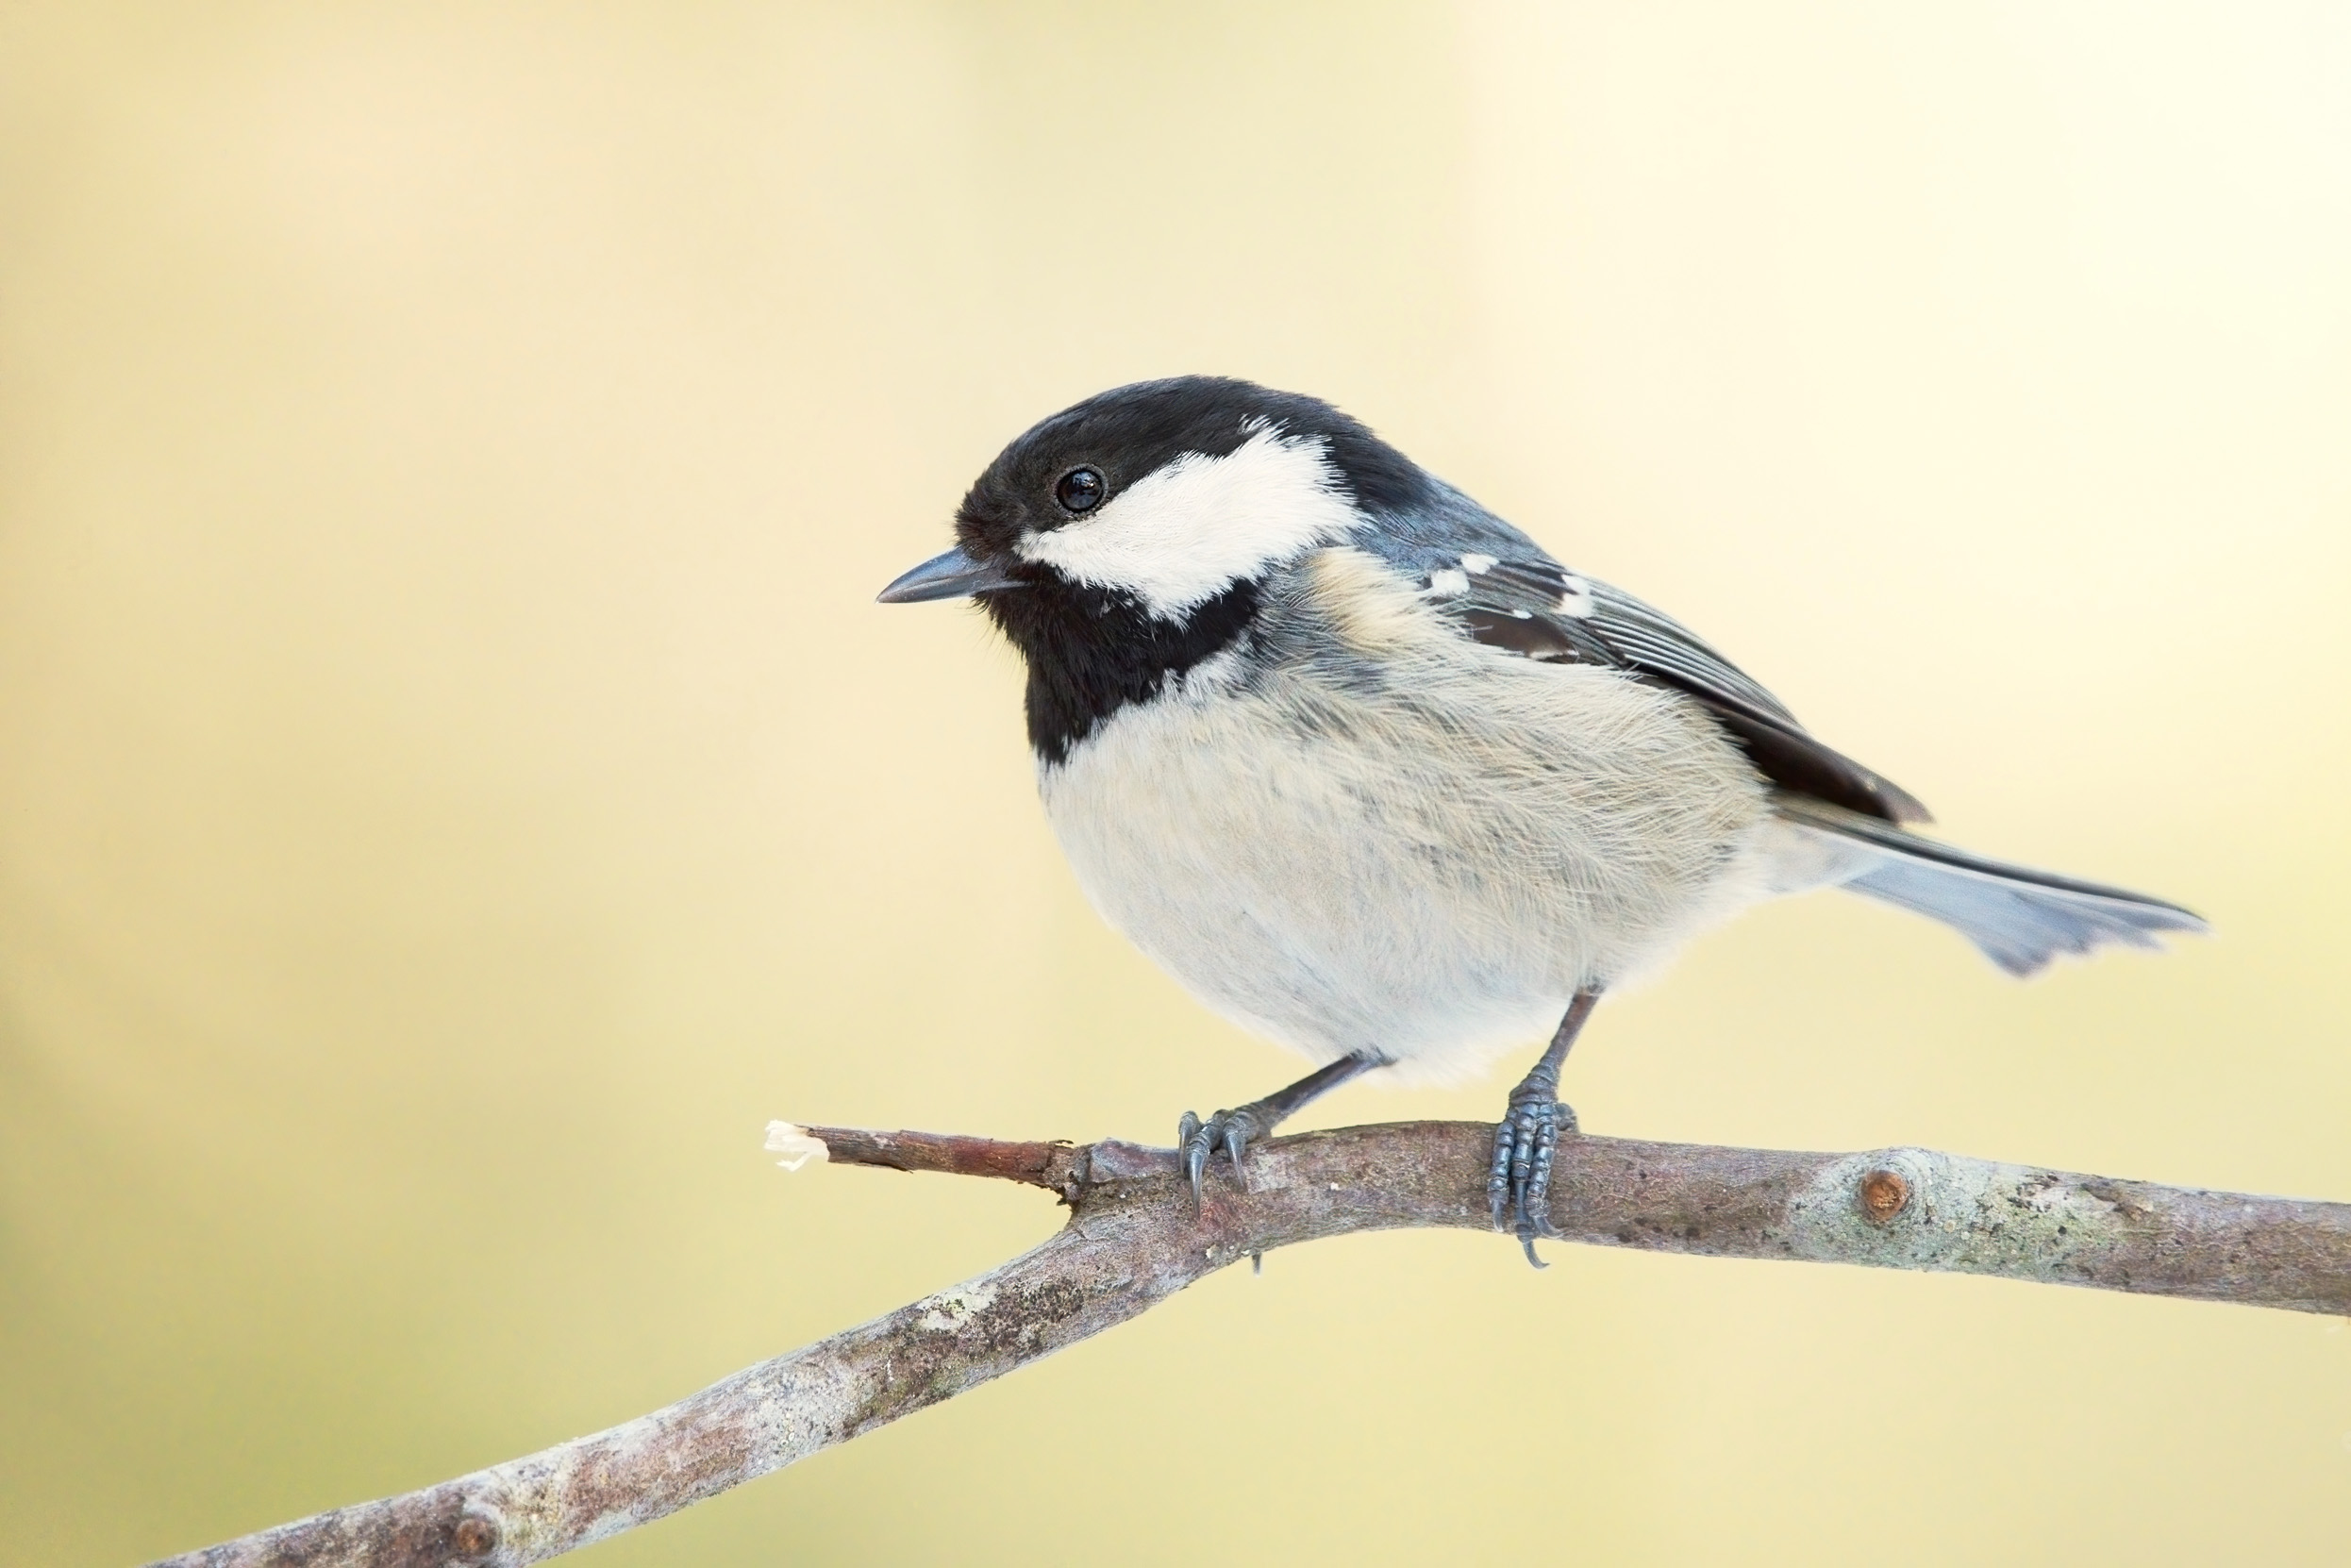 Coal Tit perched by themselves on a branch.